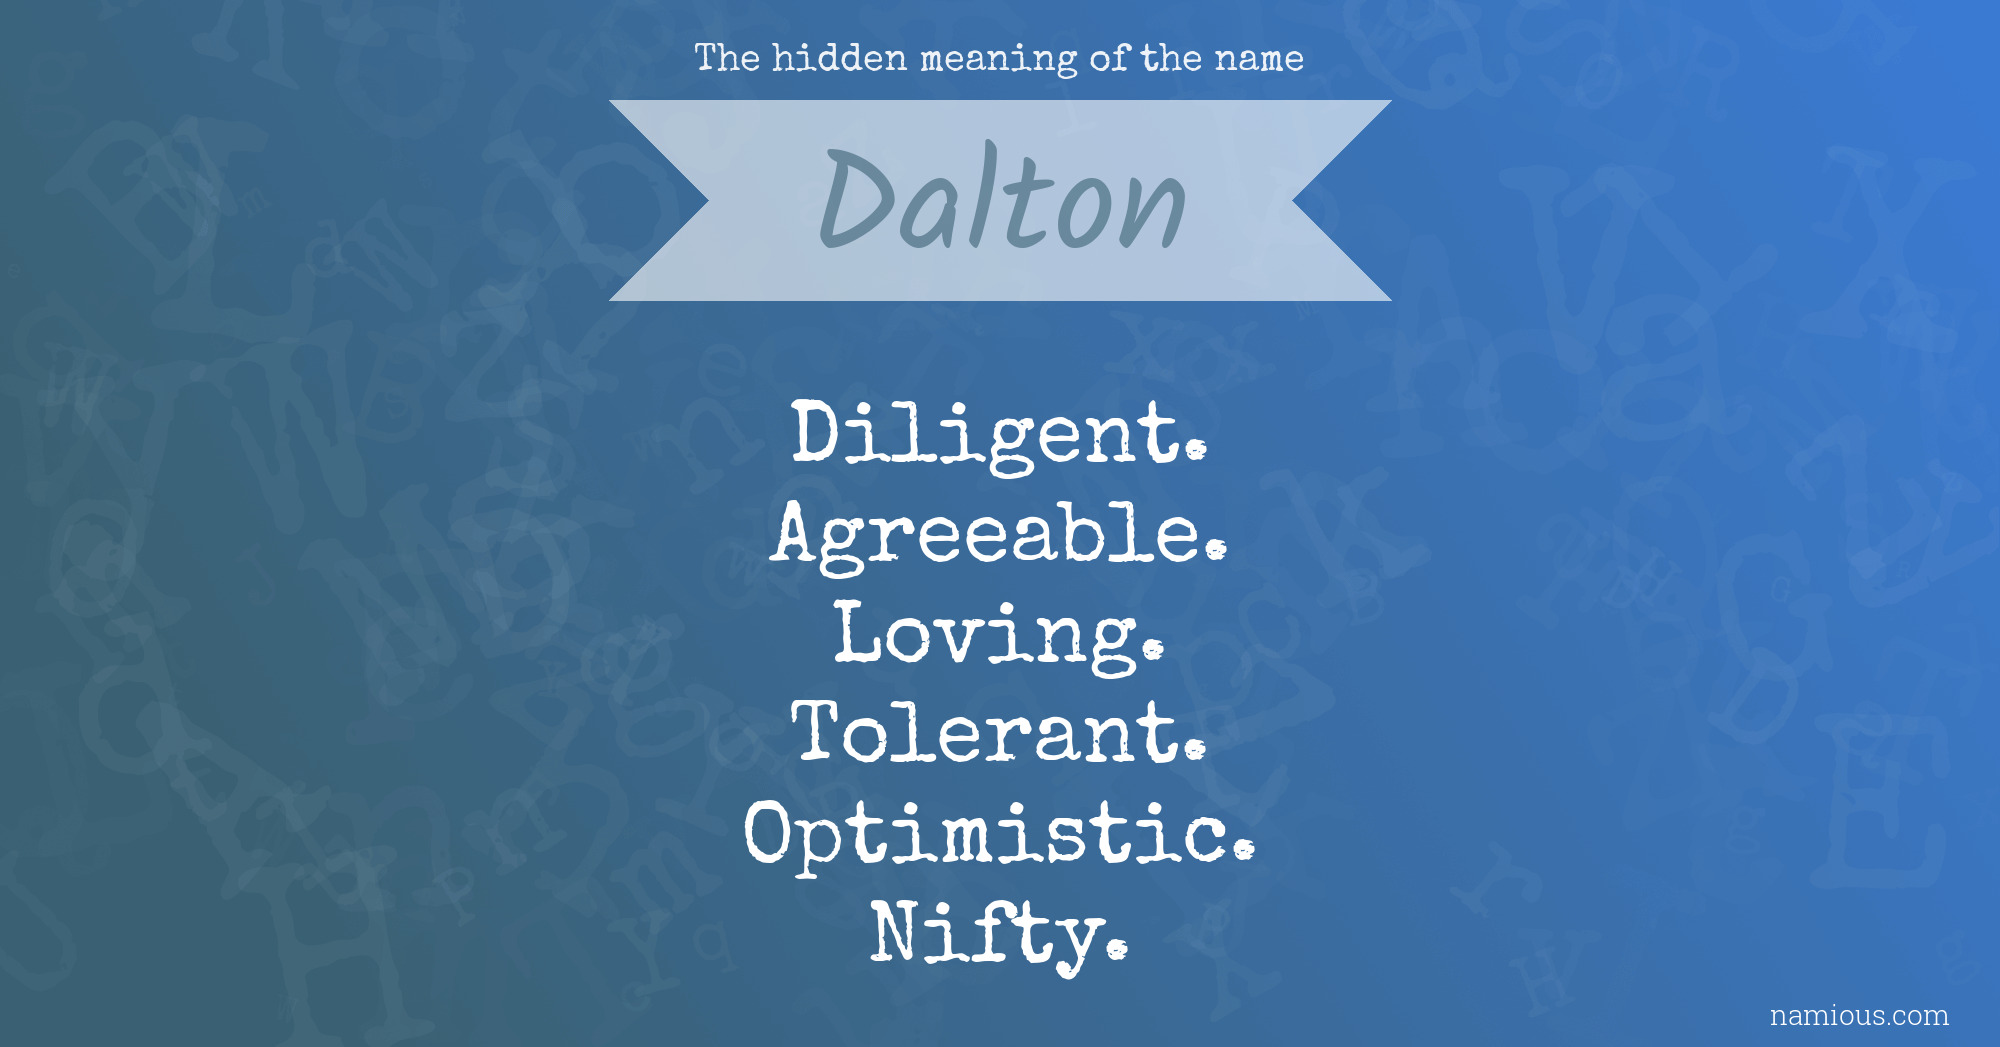 The hidden meaning of the name Dalton